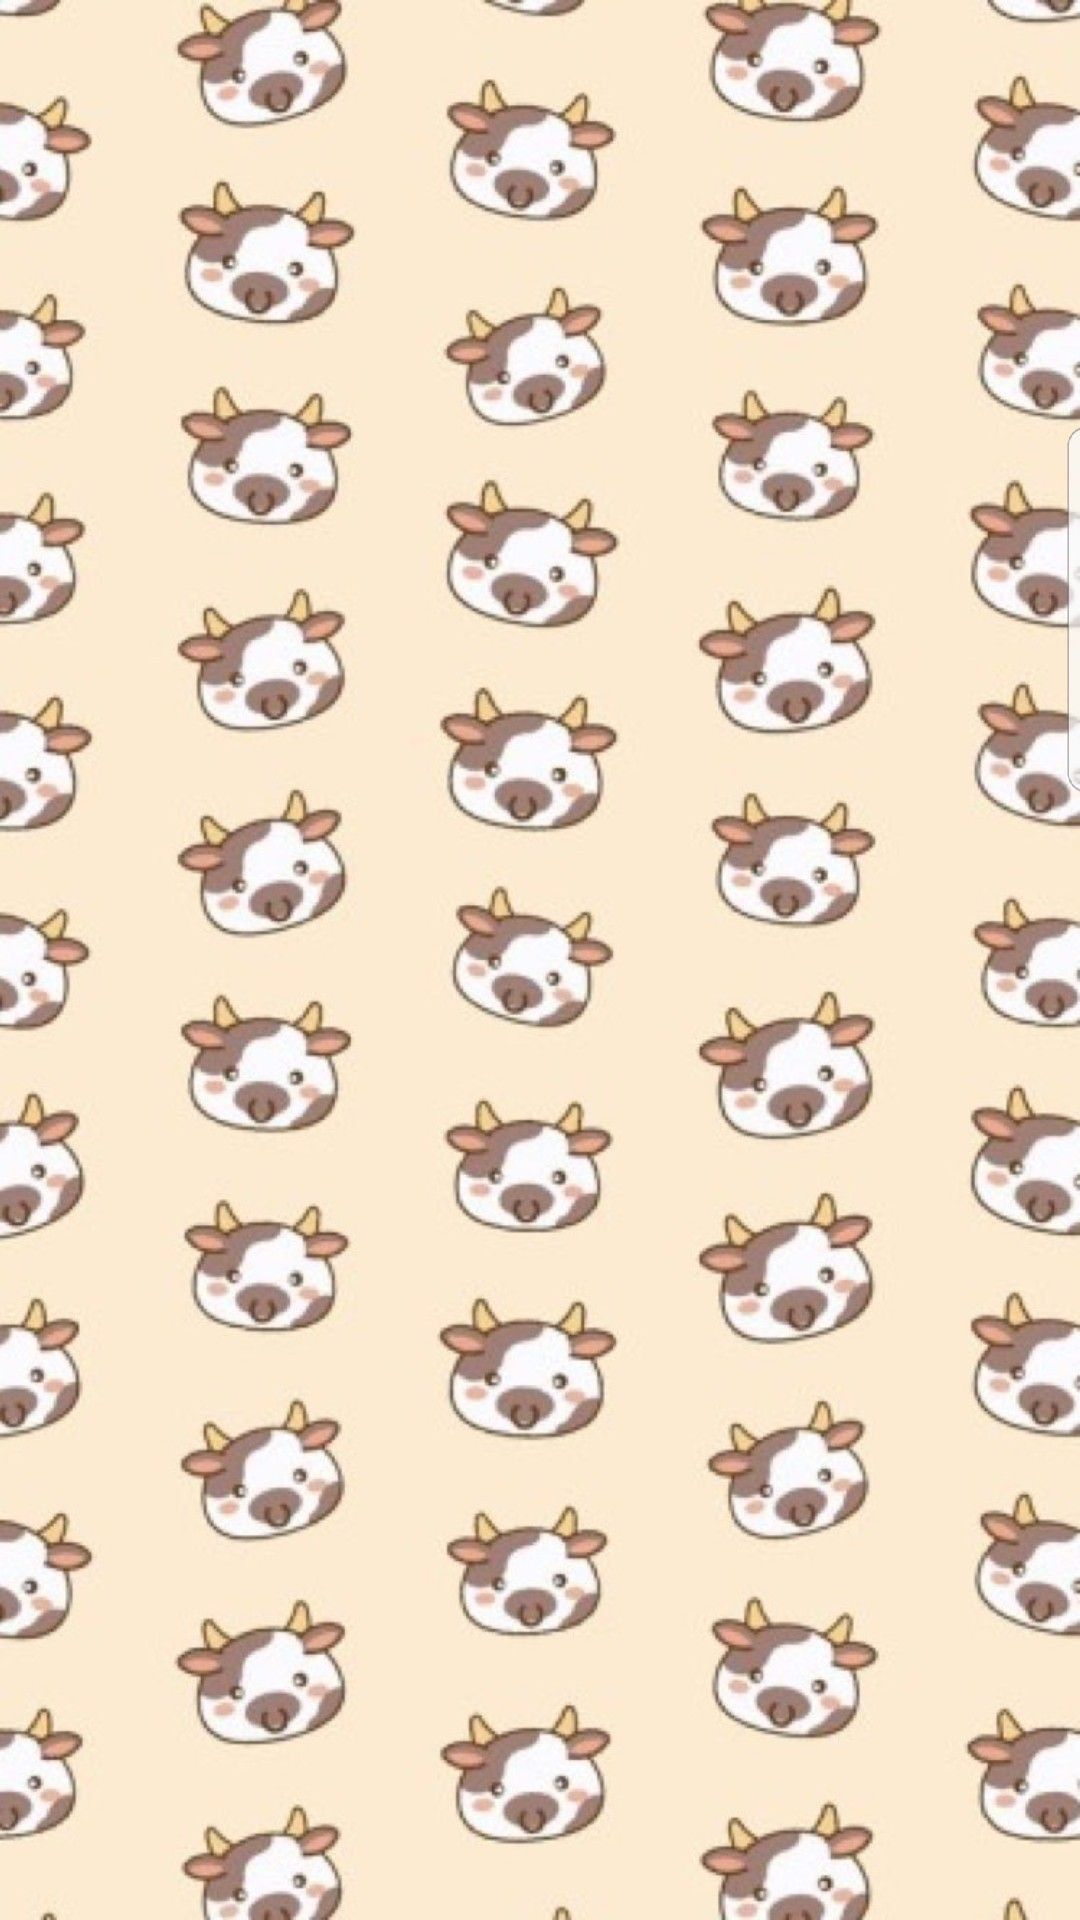 Aesthetic Cow Print Wallpaper Laptop - Cow Aesthetic Wallpapers